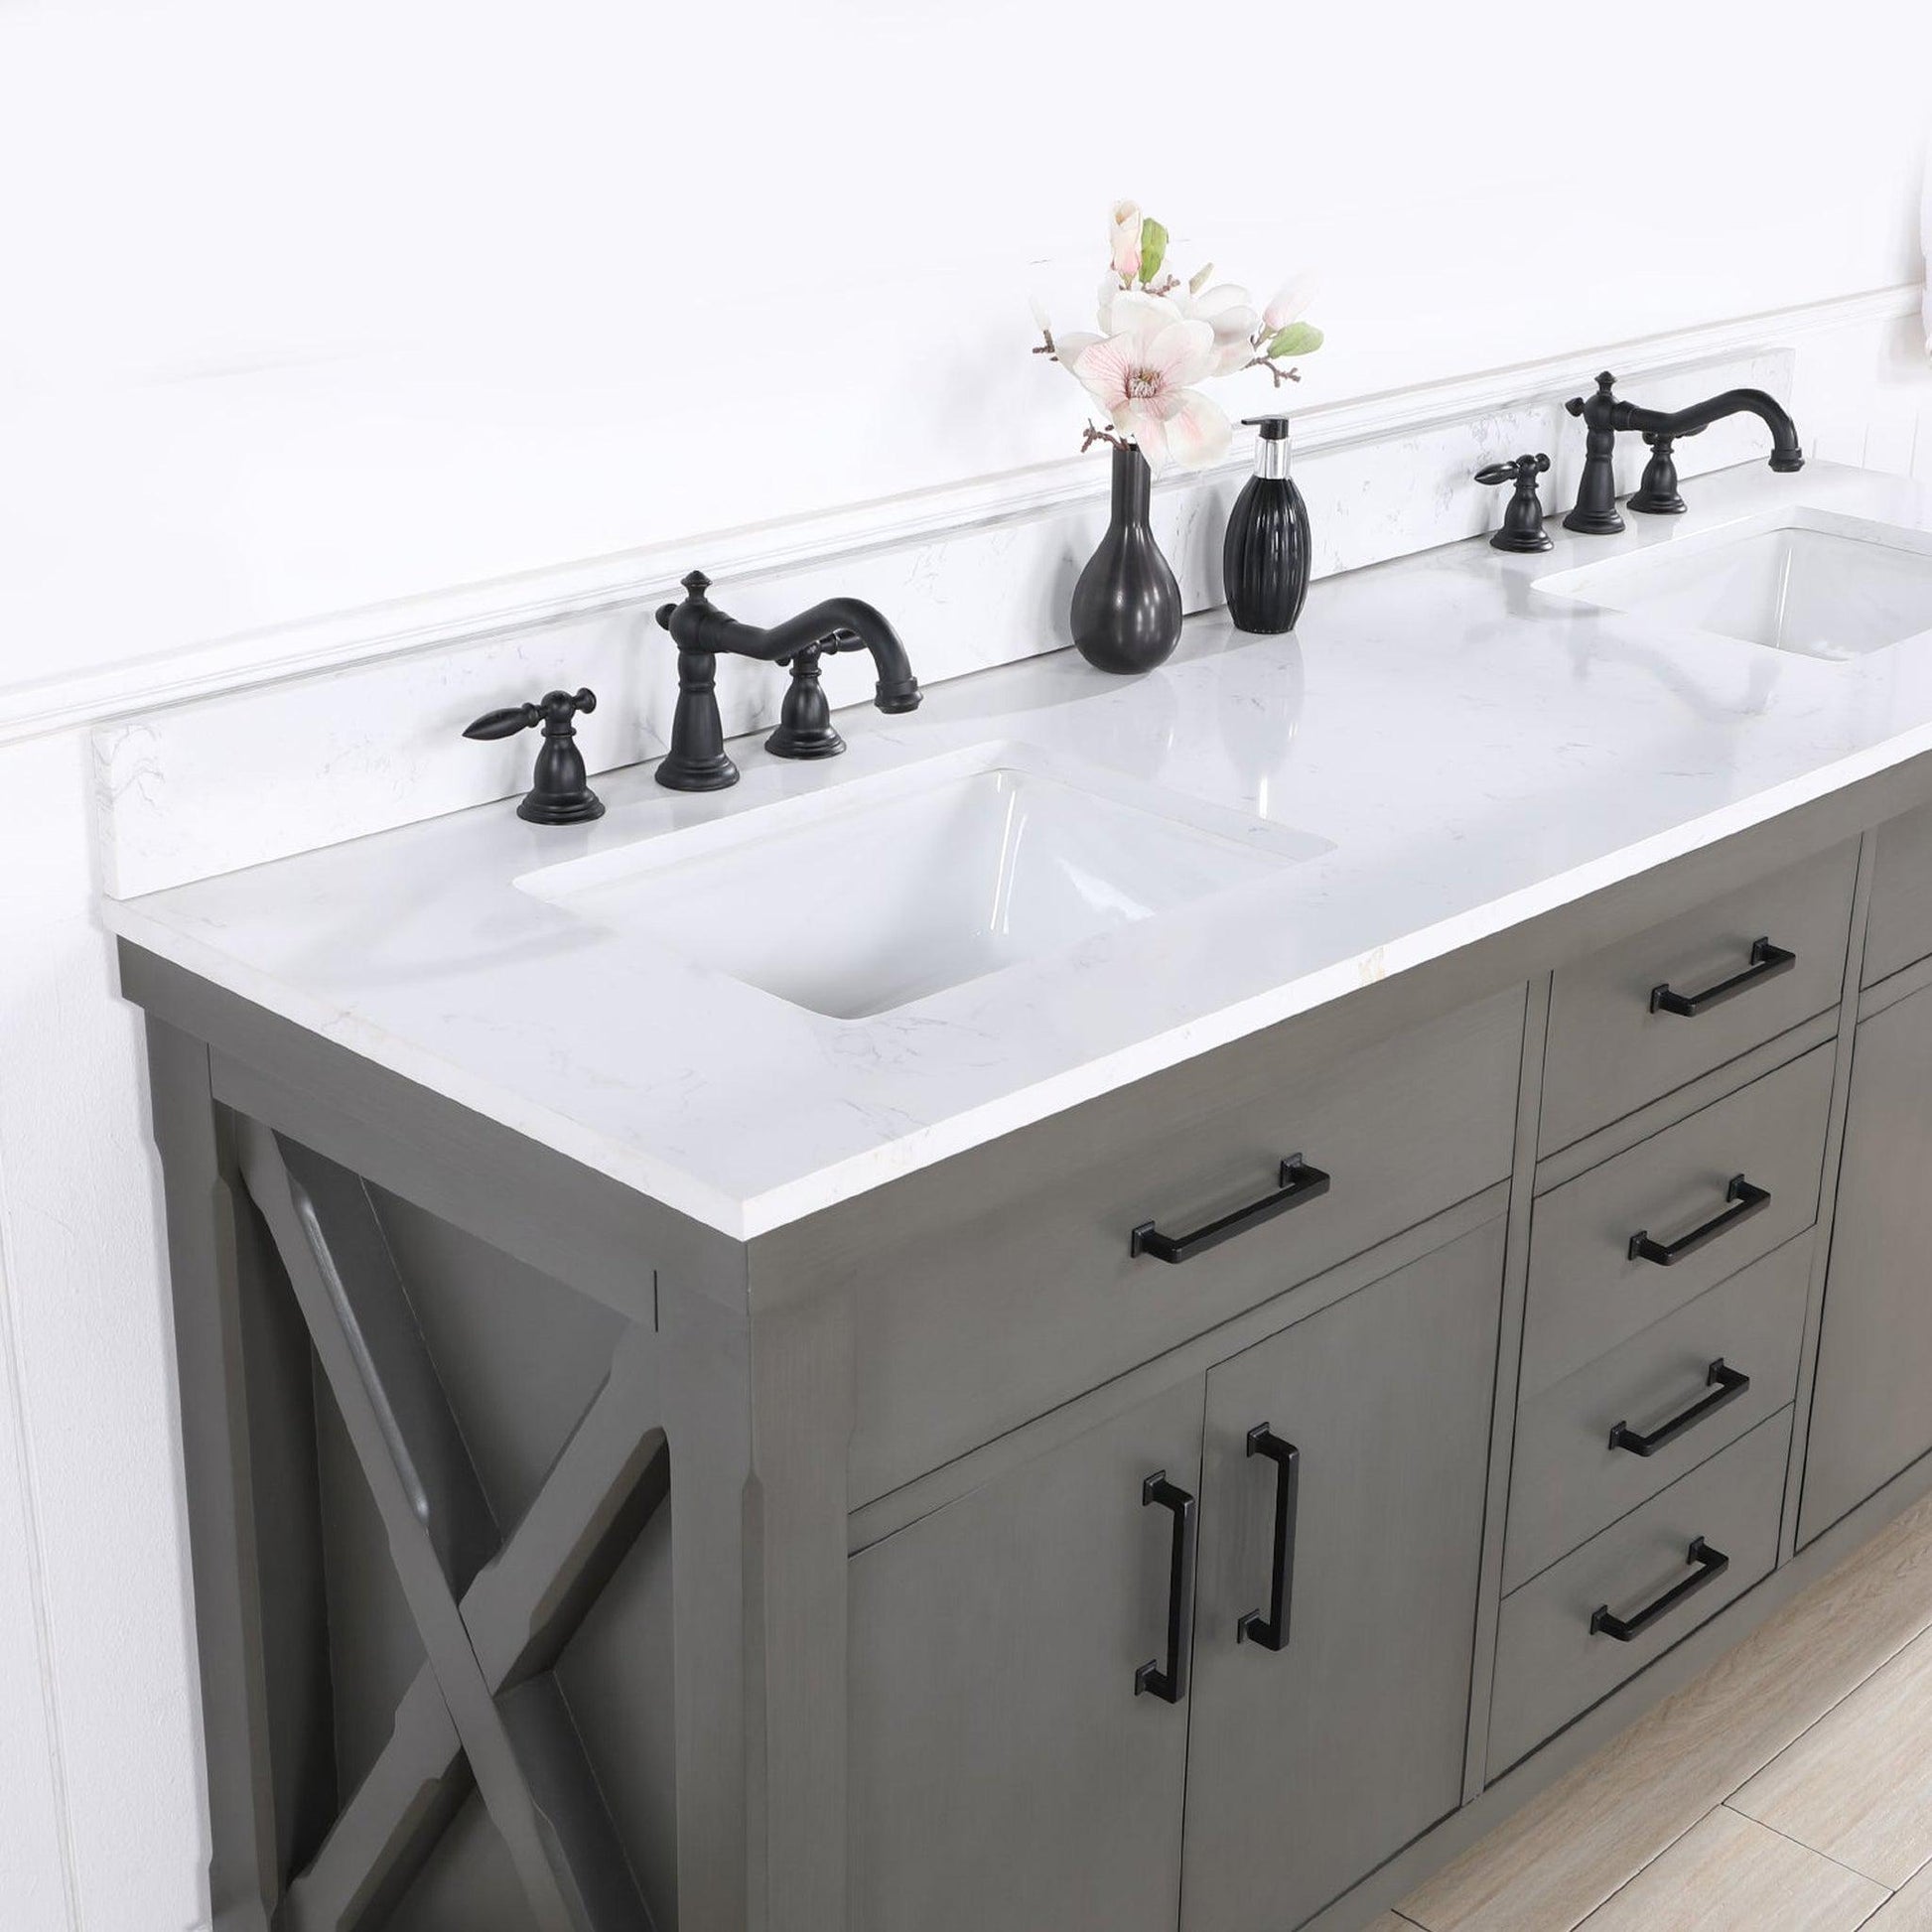 Vinnova Viella 72" Double Sink Bath Vanity In Rust Grey Finish With White Composite Countertop And Mirror